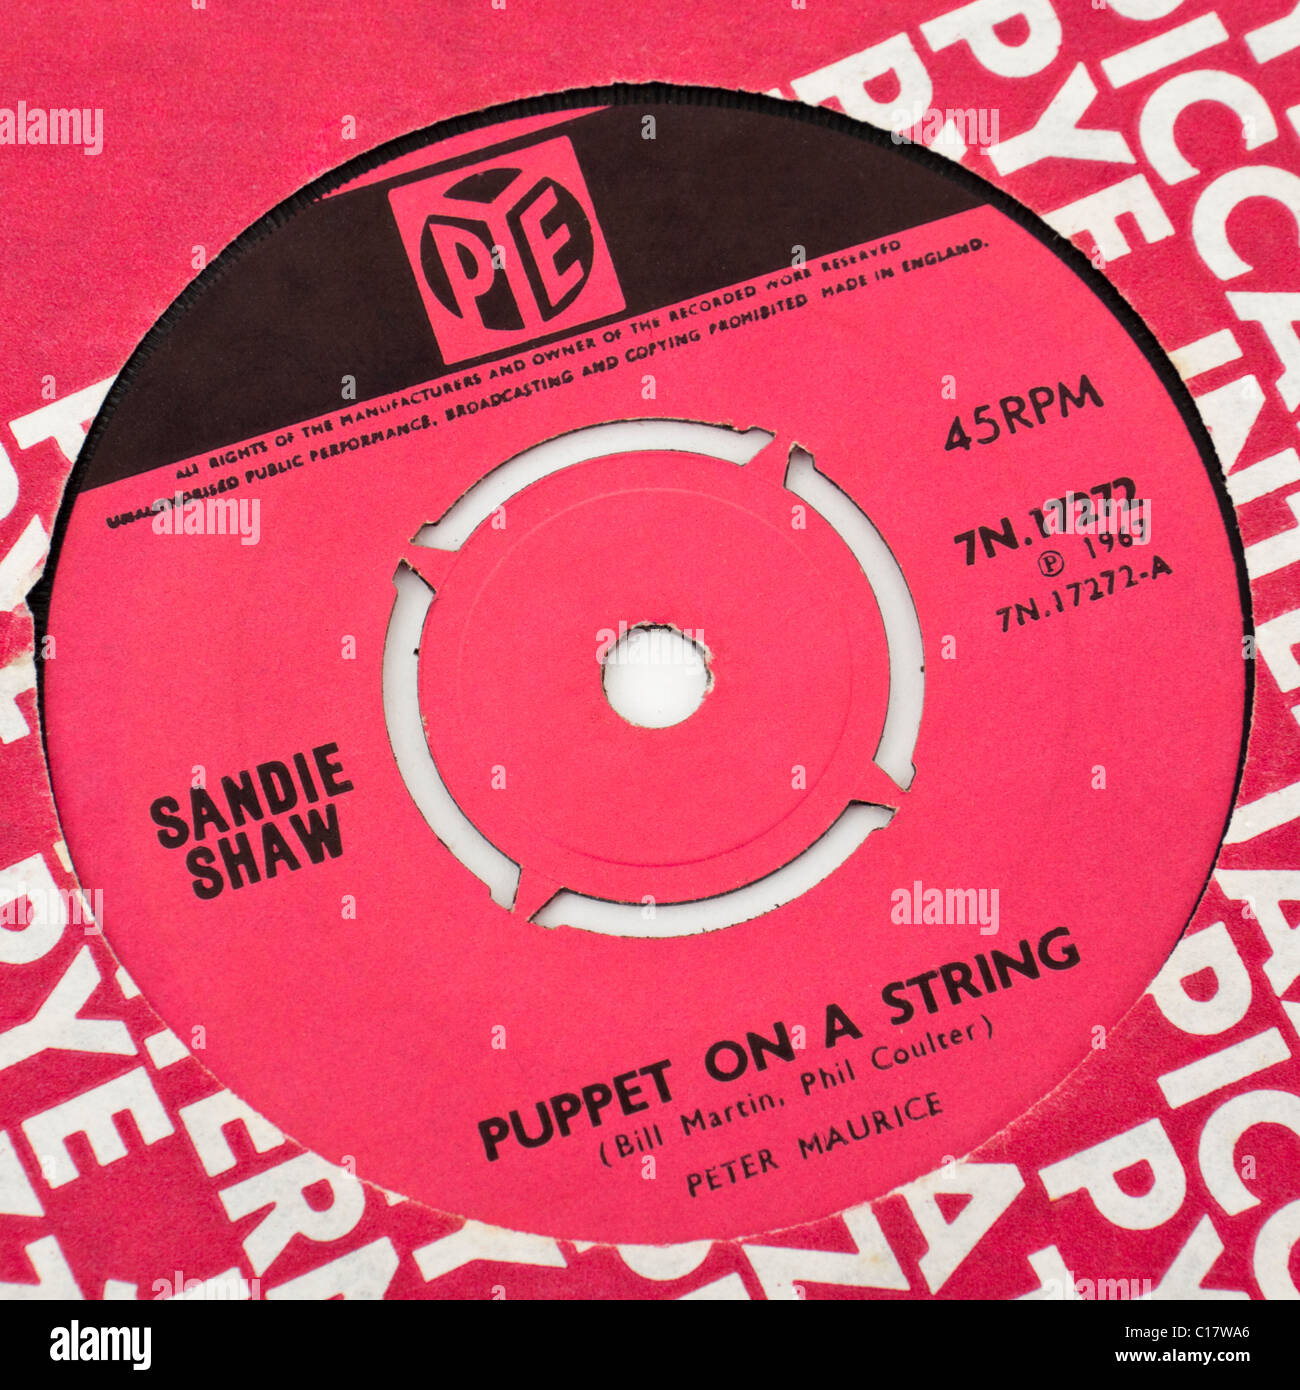 Puppet on a String (Sandie Shaw) record label Stock Photo